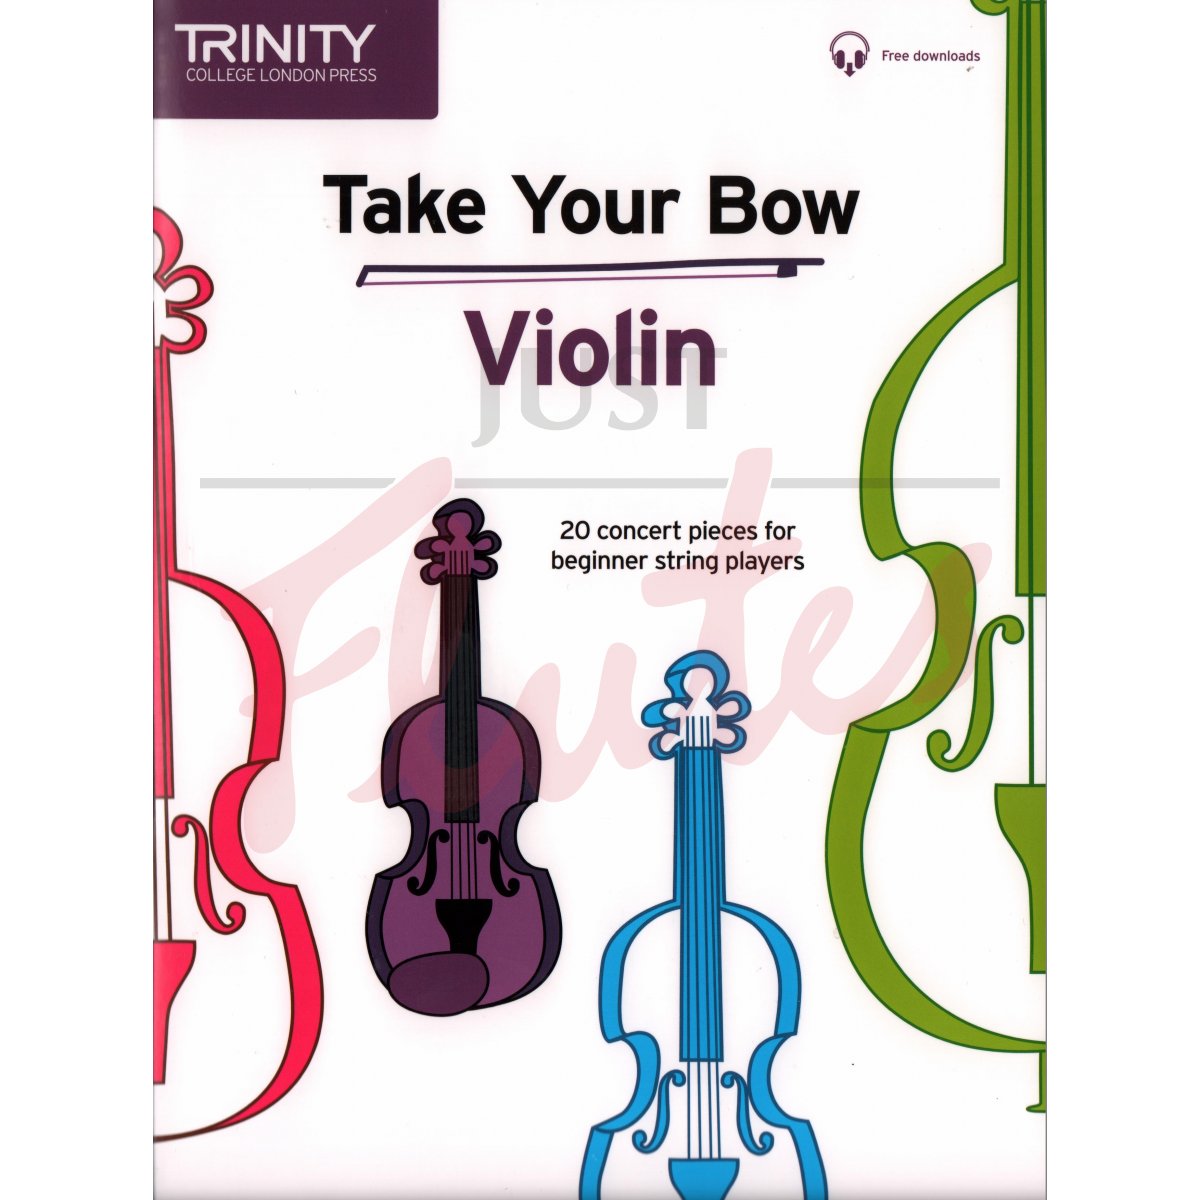 Take Your Bow - Violin